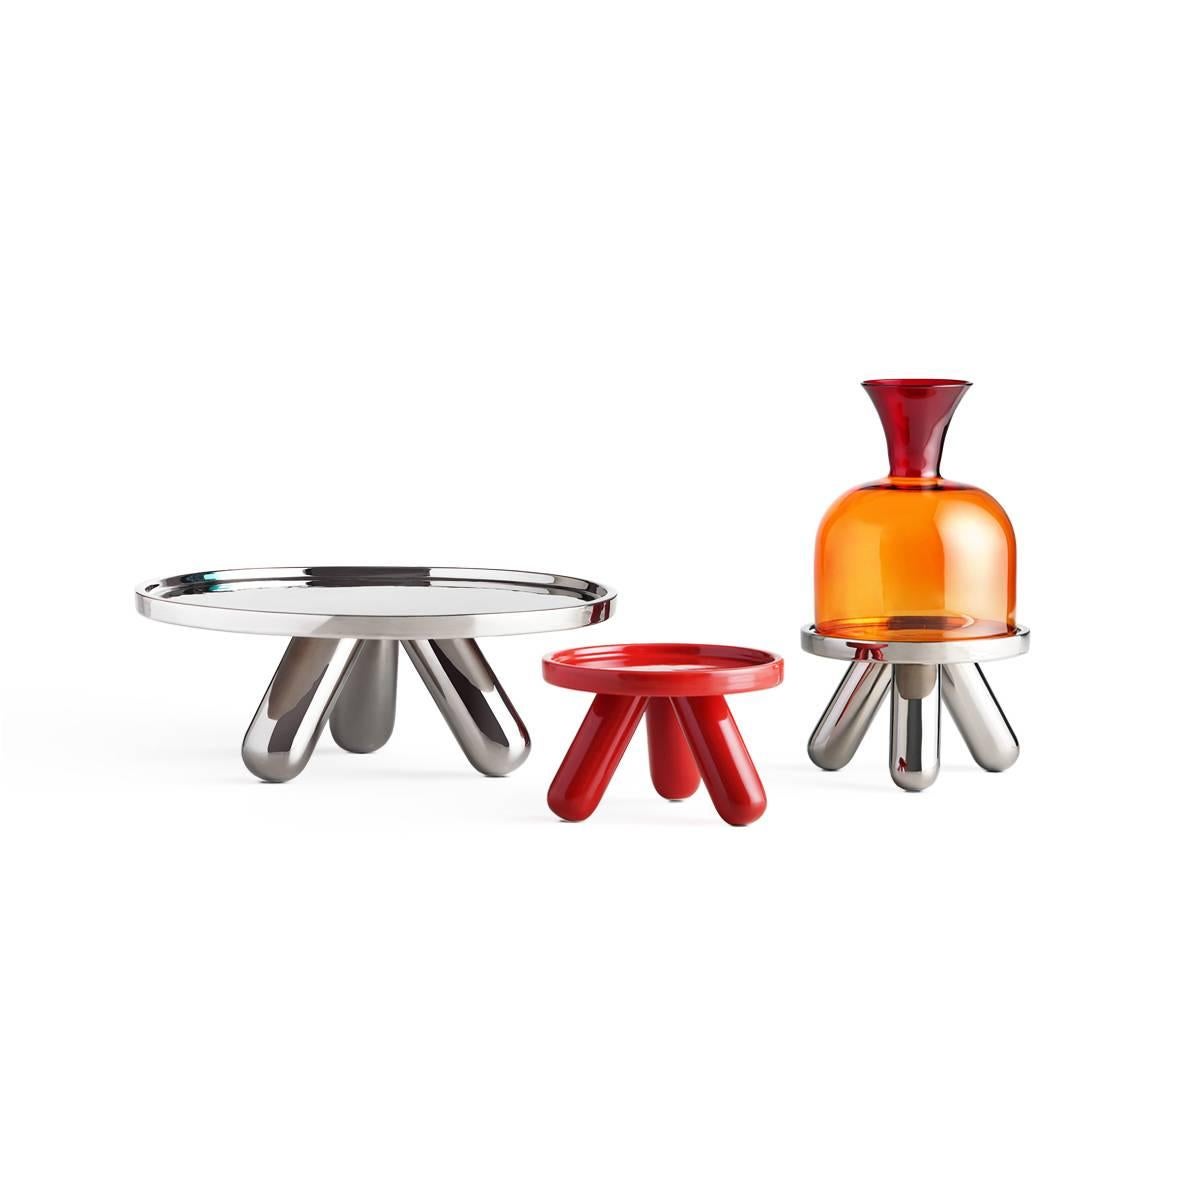 Gambino is a small ceramic riser designed by Aldo Cibic. The product has a platinum finishing that gives it a shiny and sophisticated allure. Gambino is part of Table Joy Collection: an upbeat, vividly colored and ever so slightly radical family of